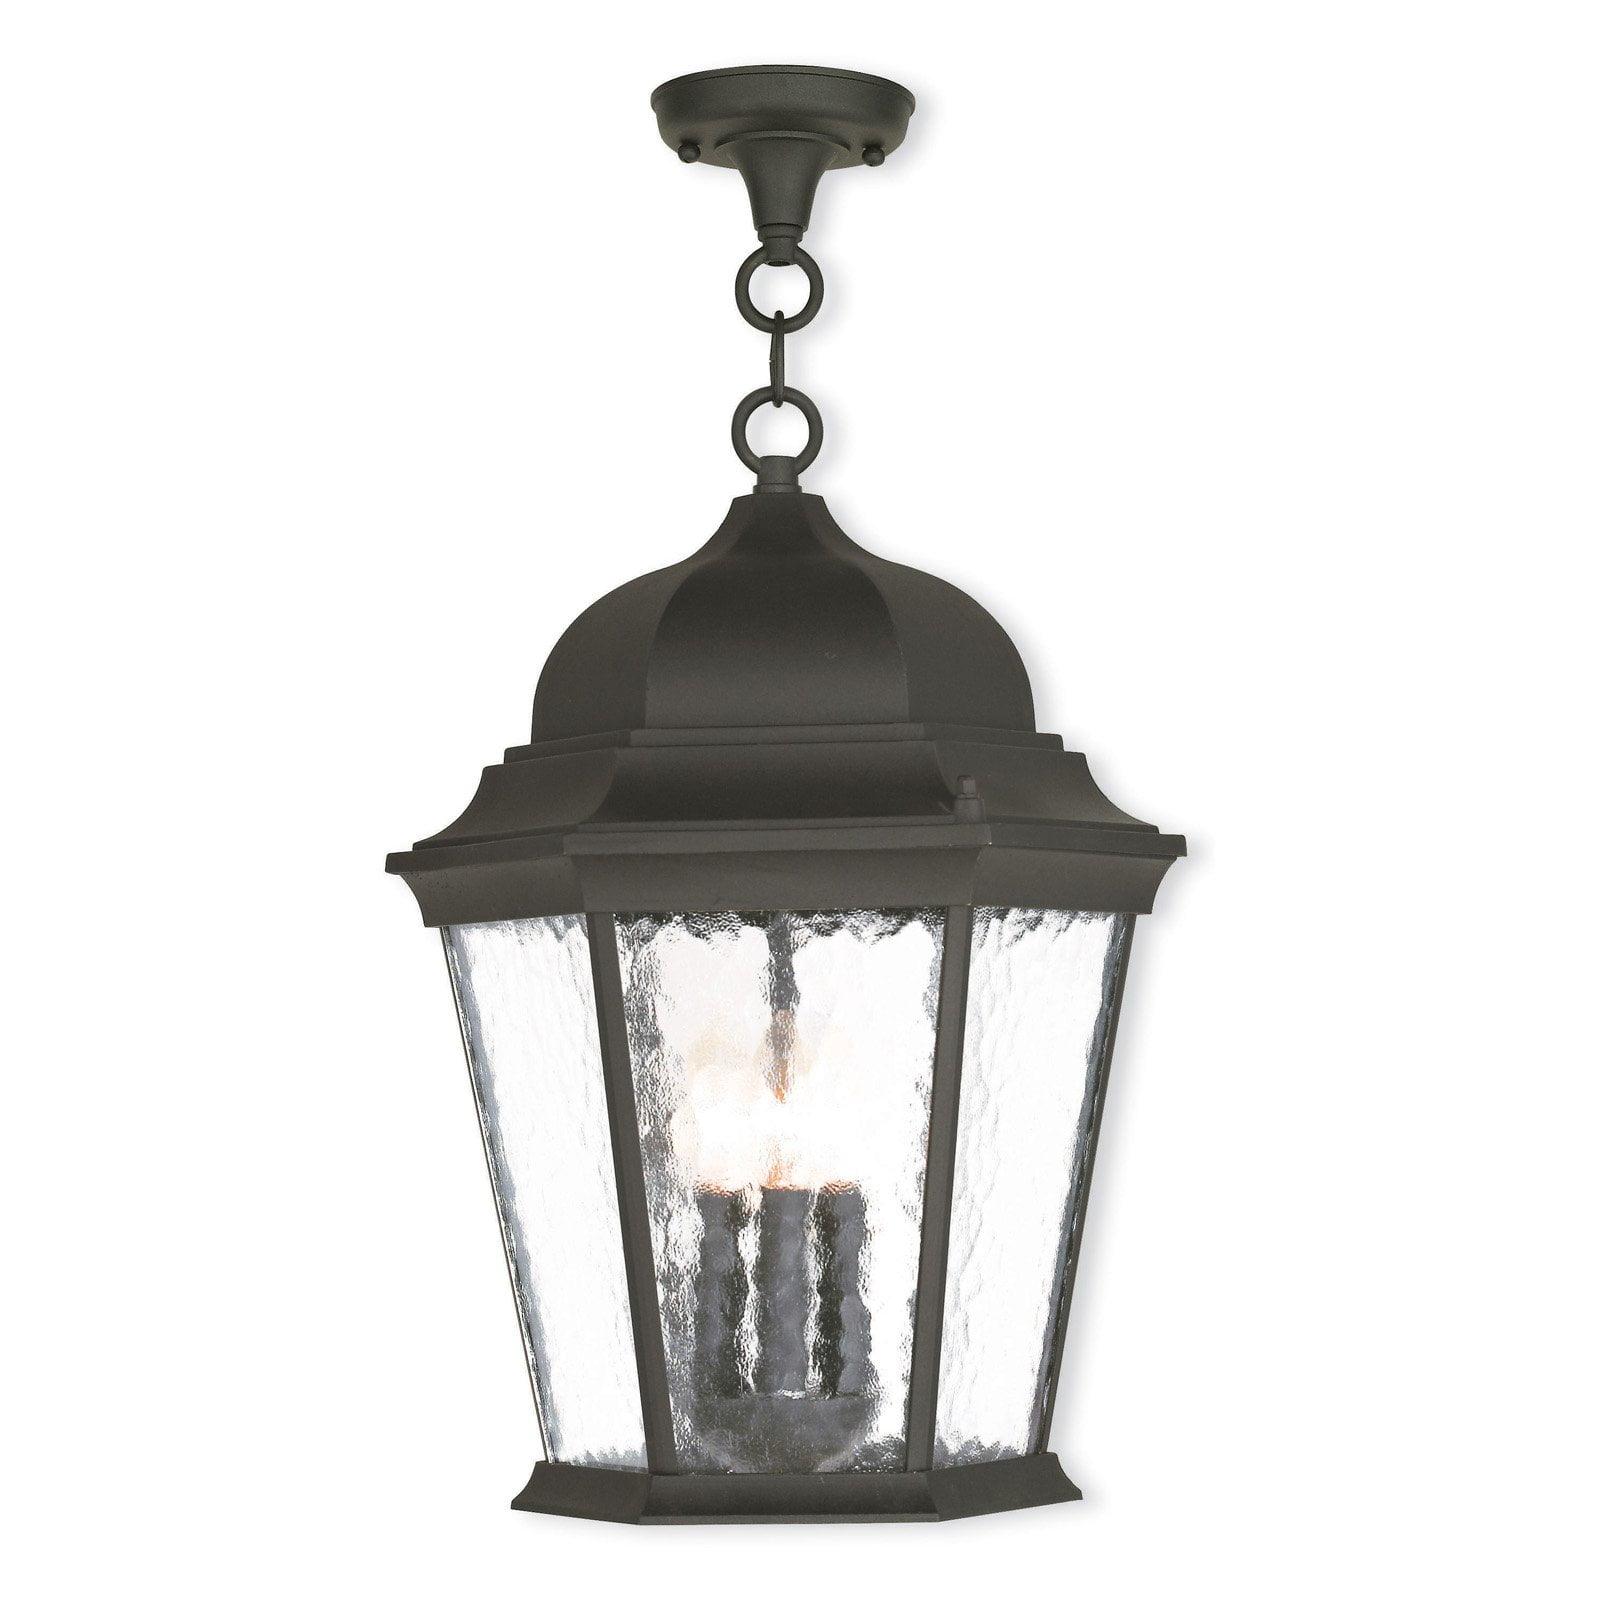 Hamilton Textured Black Outdoor Pendant Lantern with Clear Water Glass